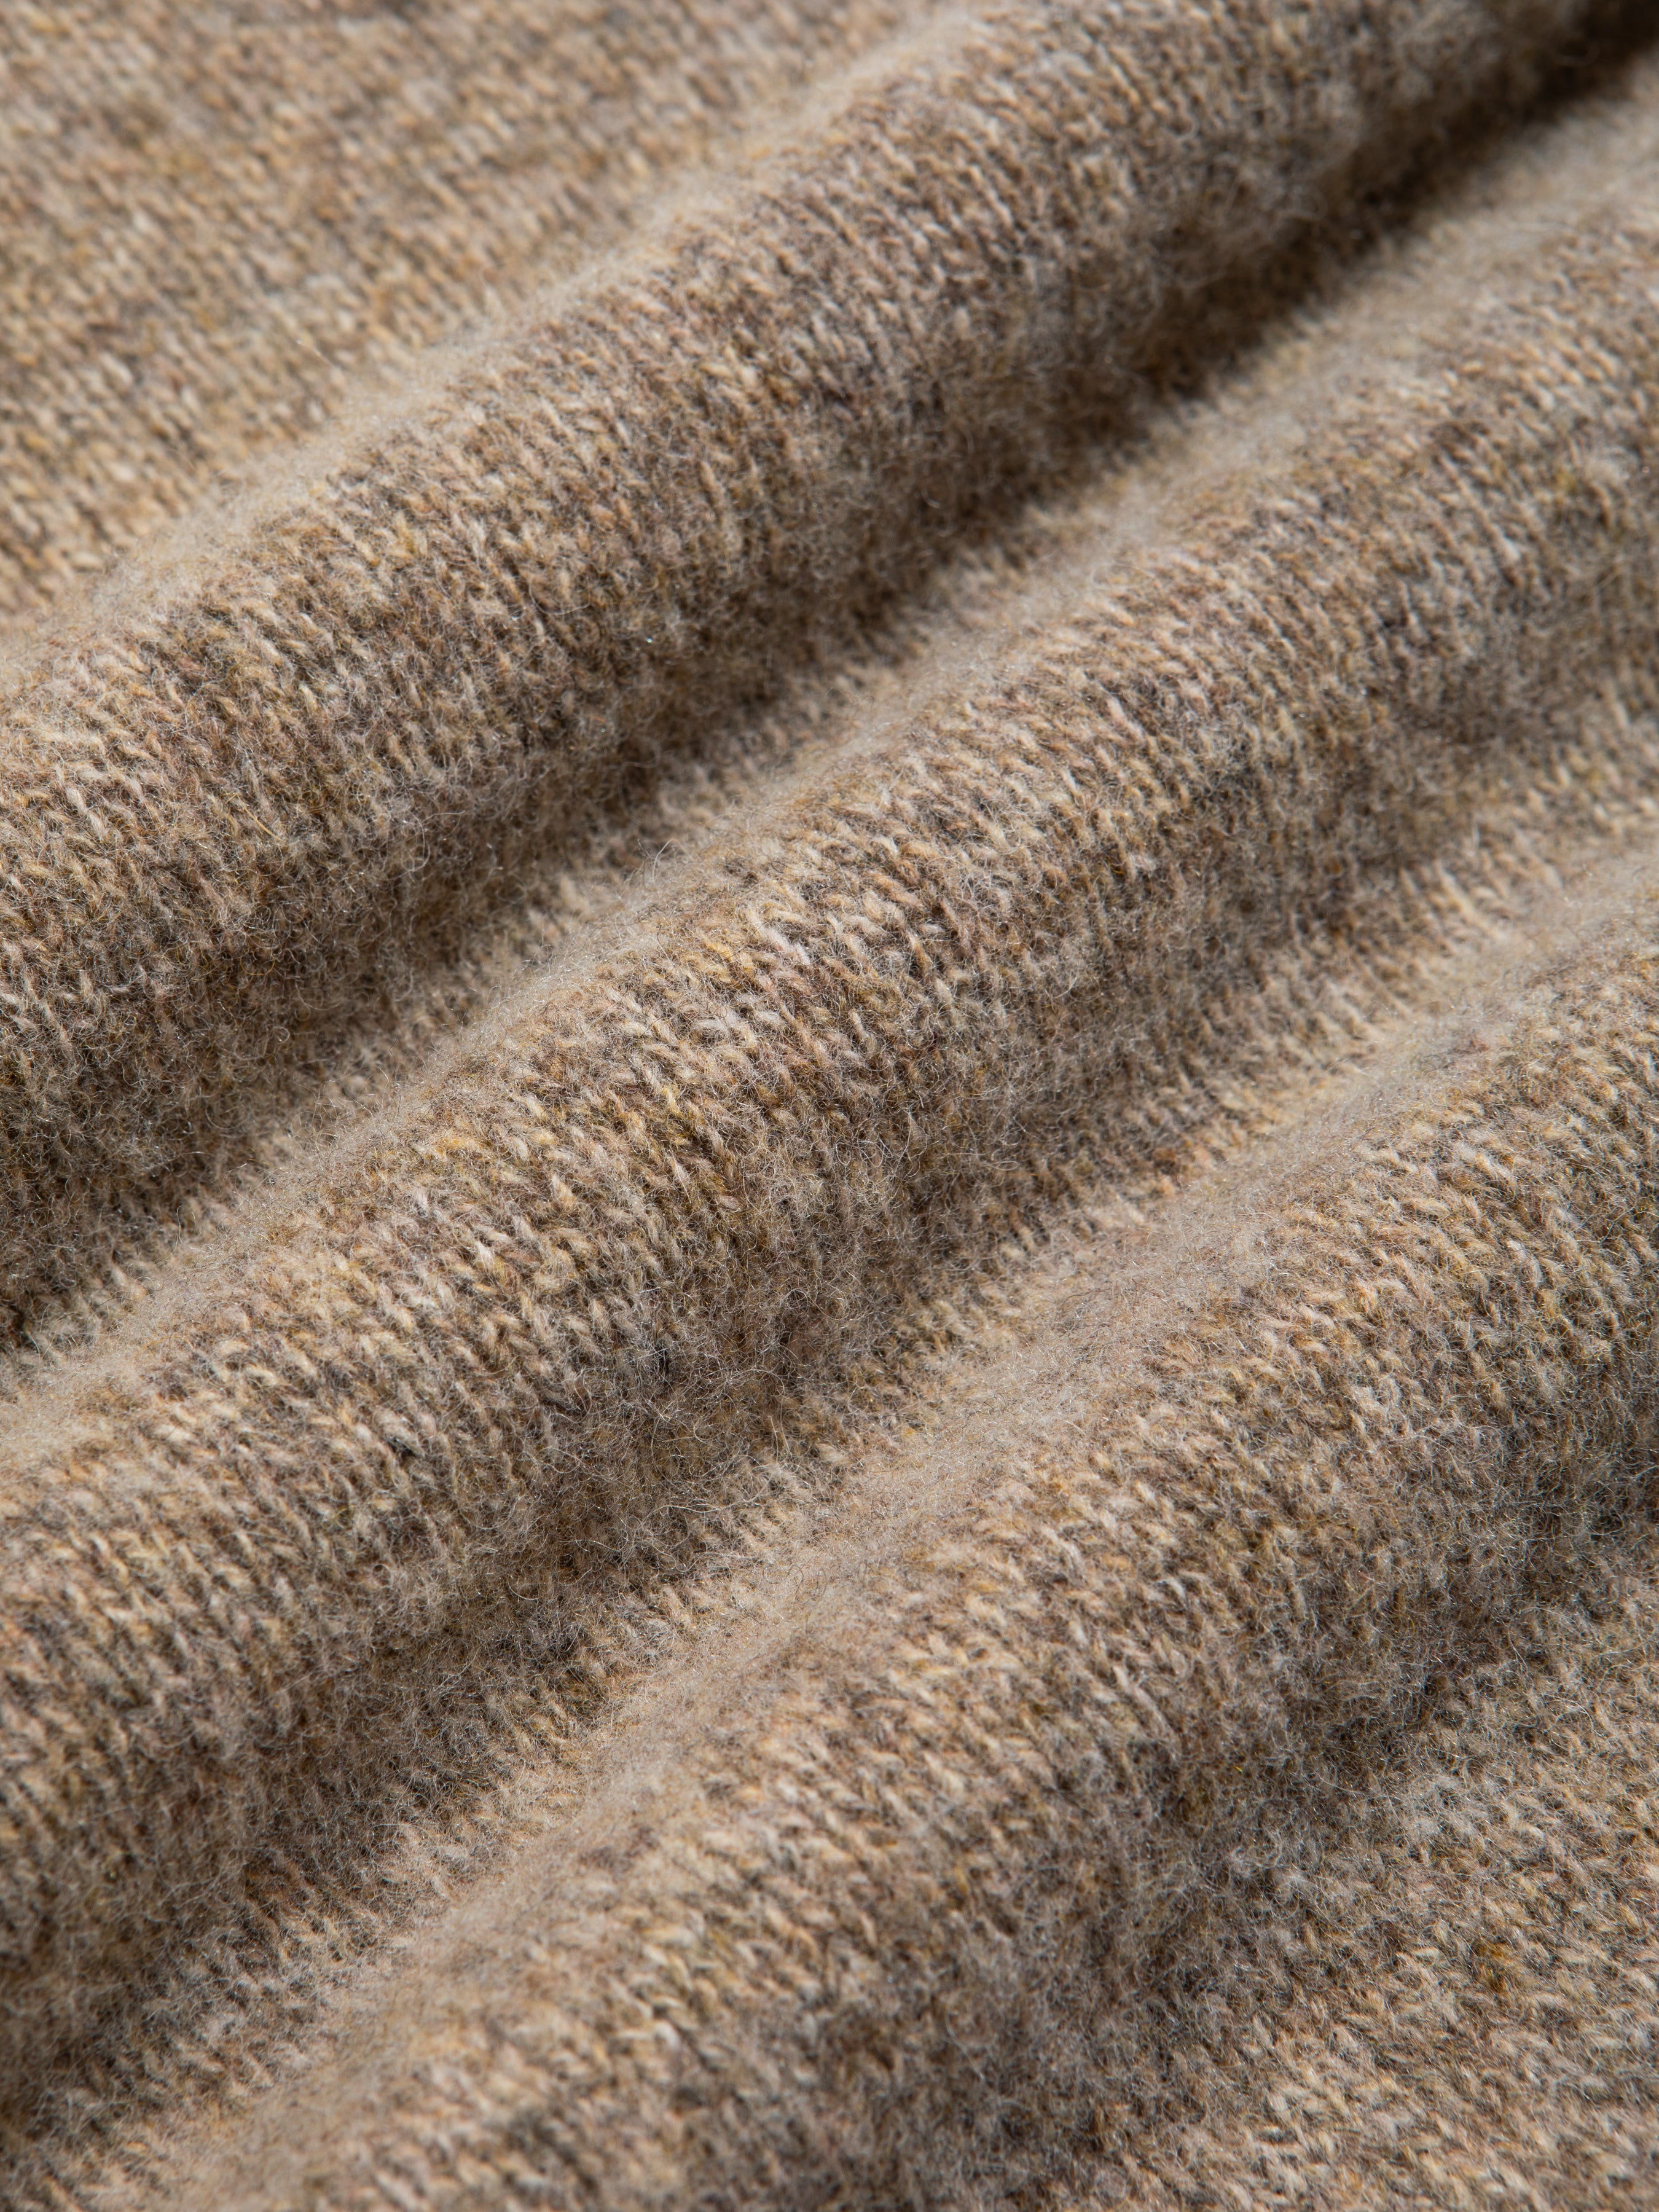 A Shetland wool material, used by KESTIN to make the Made In Scotland collection.